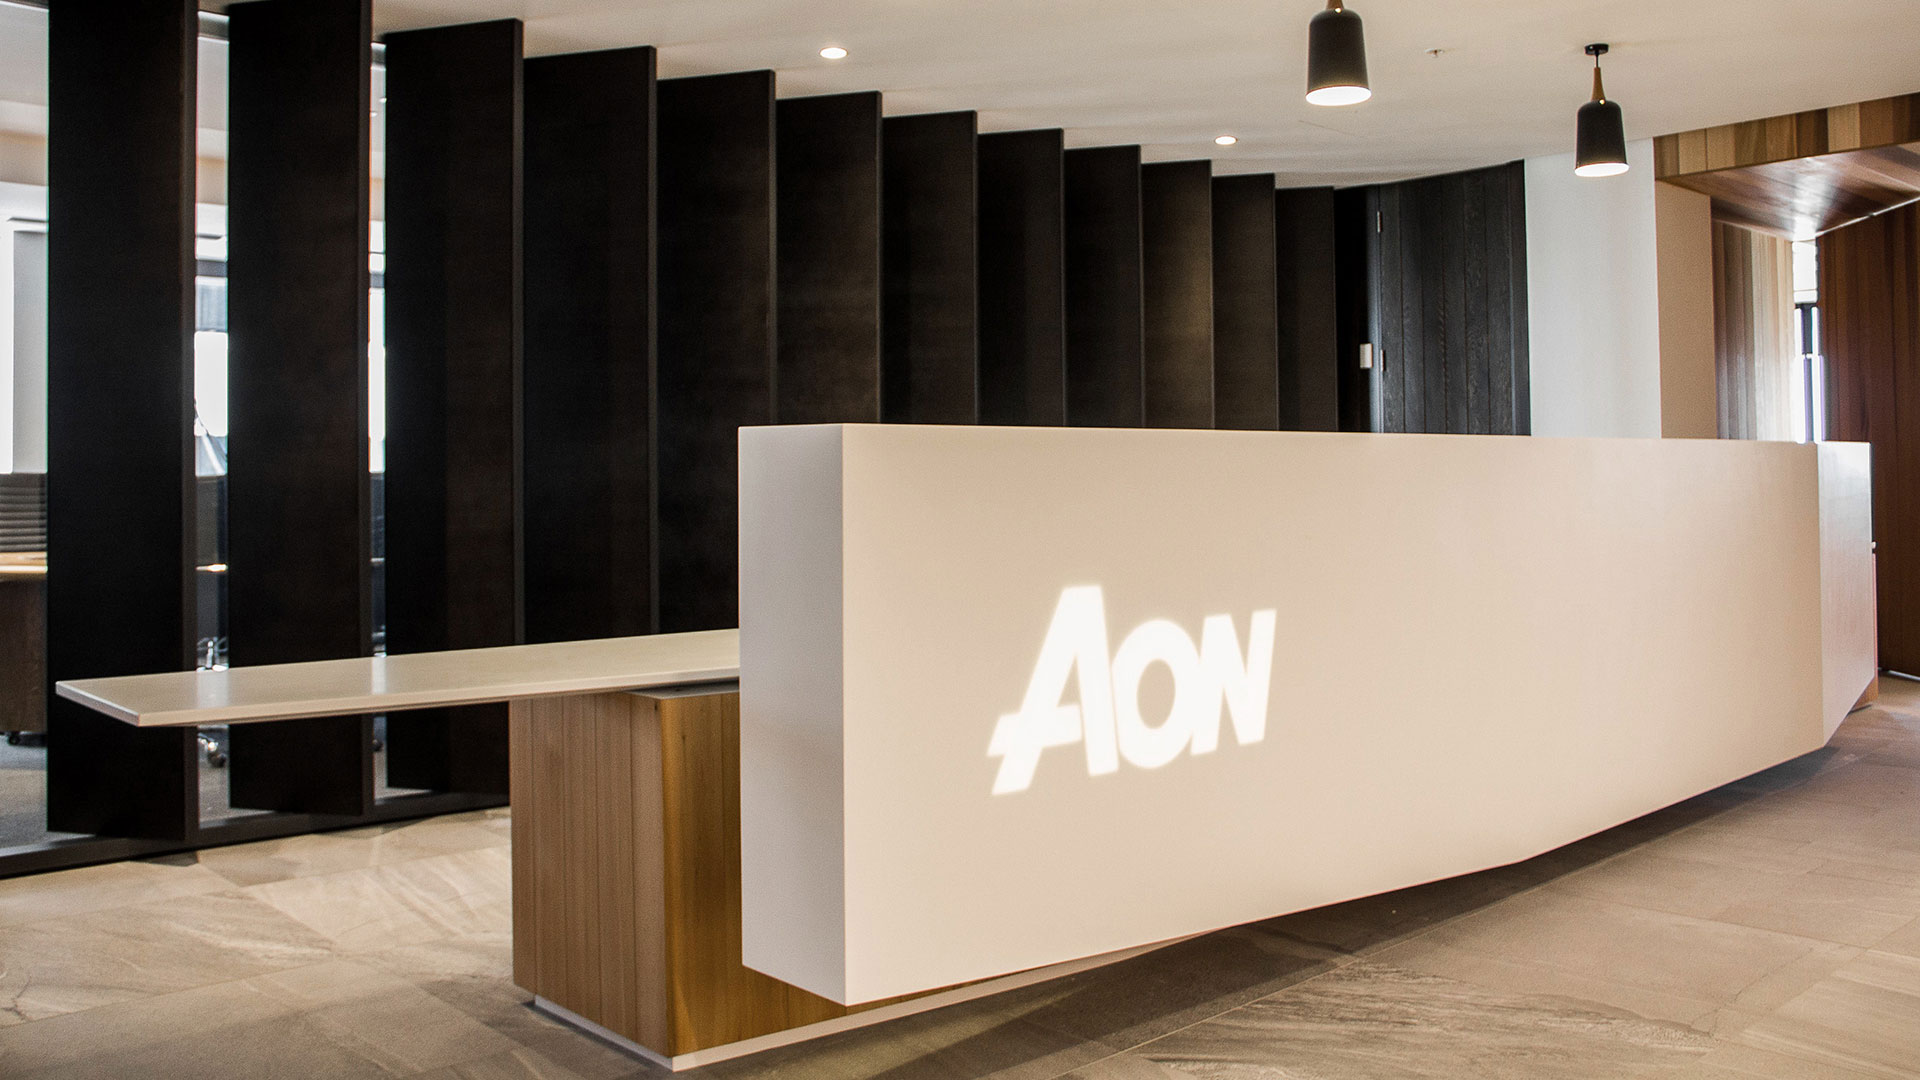 Aon Head Office designed by Matz Architects